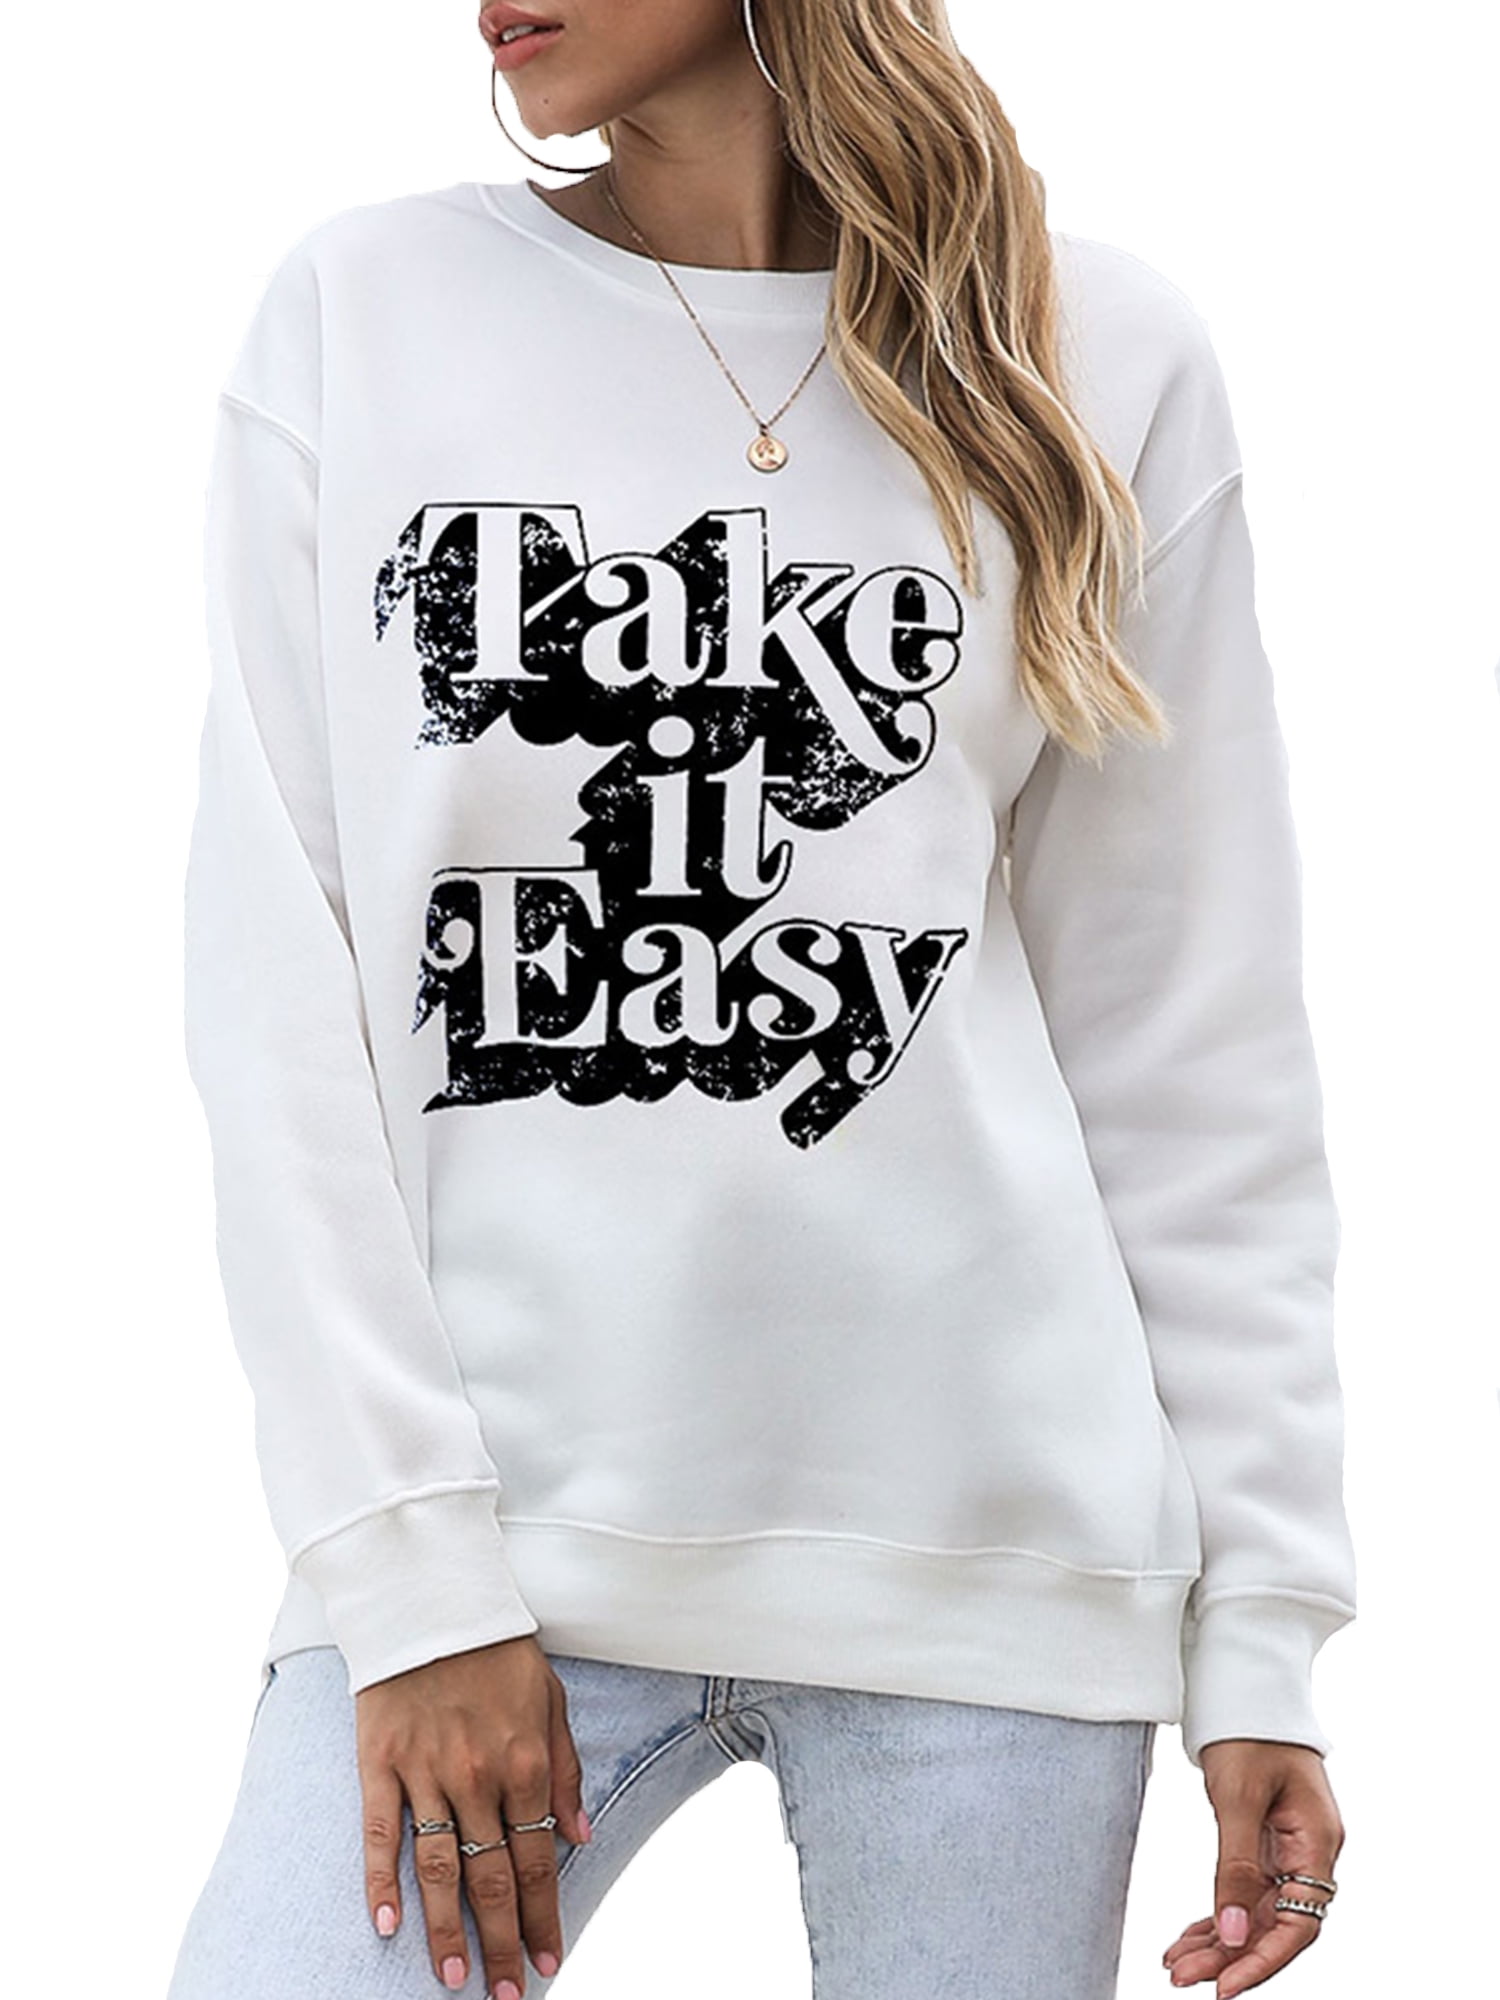 Womens Round Neck Sweater Loose Tops Pullover Long Sleeve Print Sweatshirt Basic Jumper Blouse Shirts 